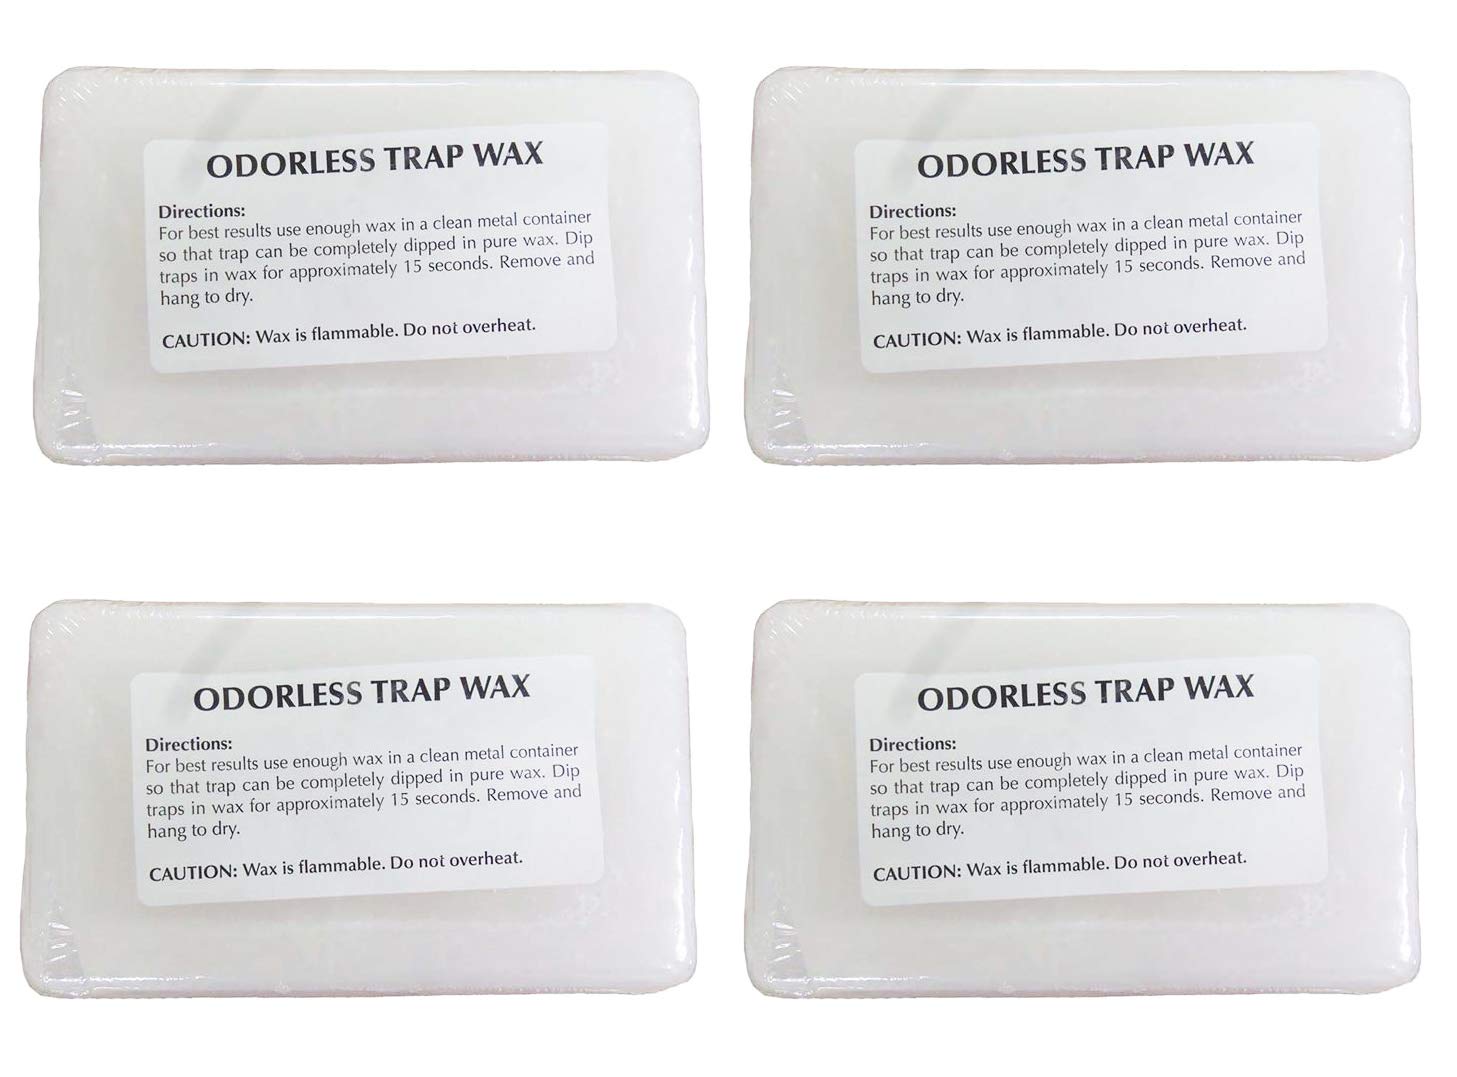 PCS Outdoors Black and White Odorless Trap Wax - 1LB Bars (4, White)